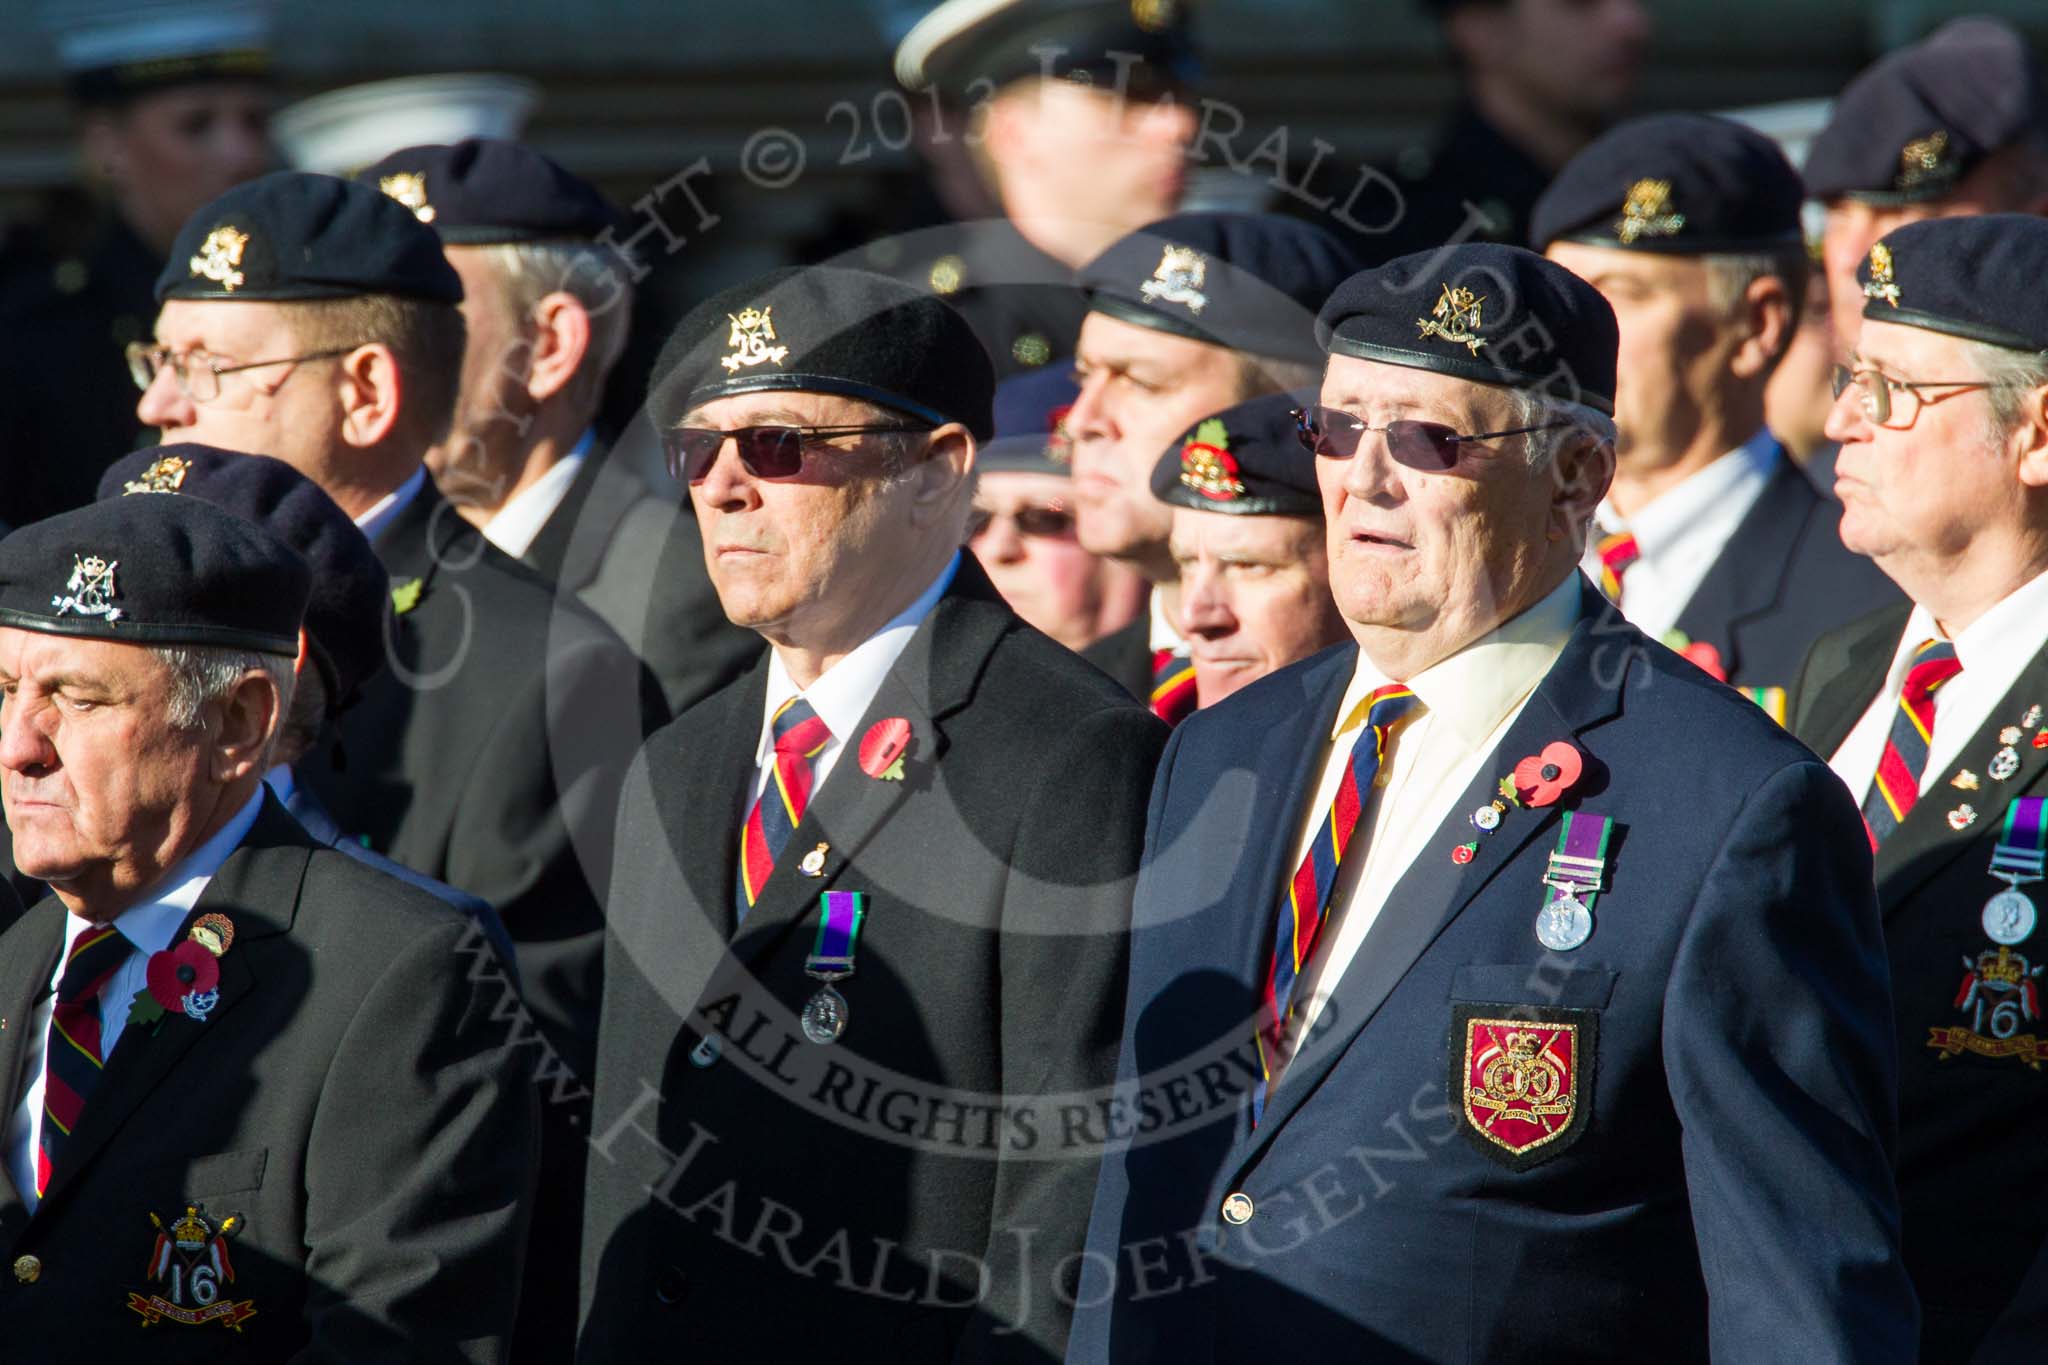 Remembrance Sunday at the Cenotaph in London 2014: Group B30 - 16/5th Queen's Royal Lancers.
Press stand opposite the Foreign Office building, Whitehall, London SW1,
London,
Greater London,
United Kingdom,
on 09 November 2014 at 12:13, image #1895